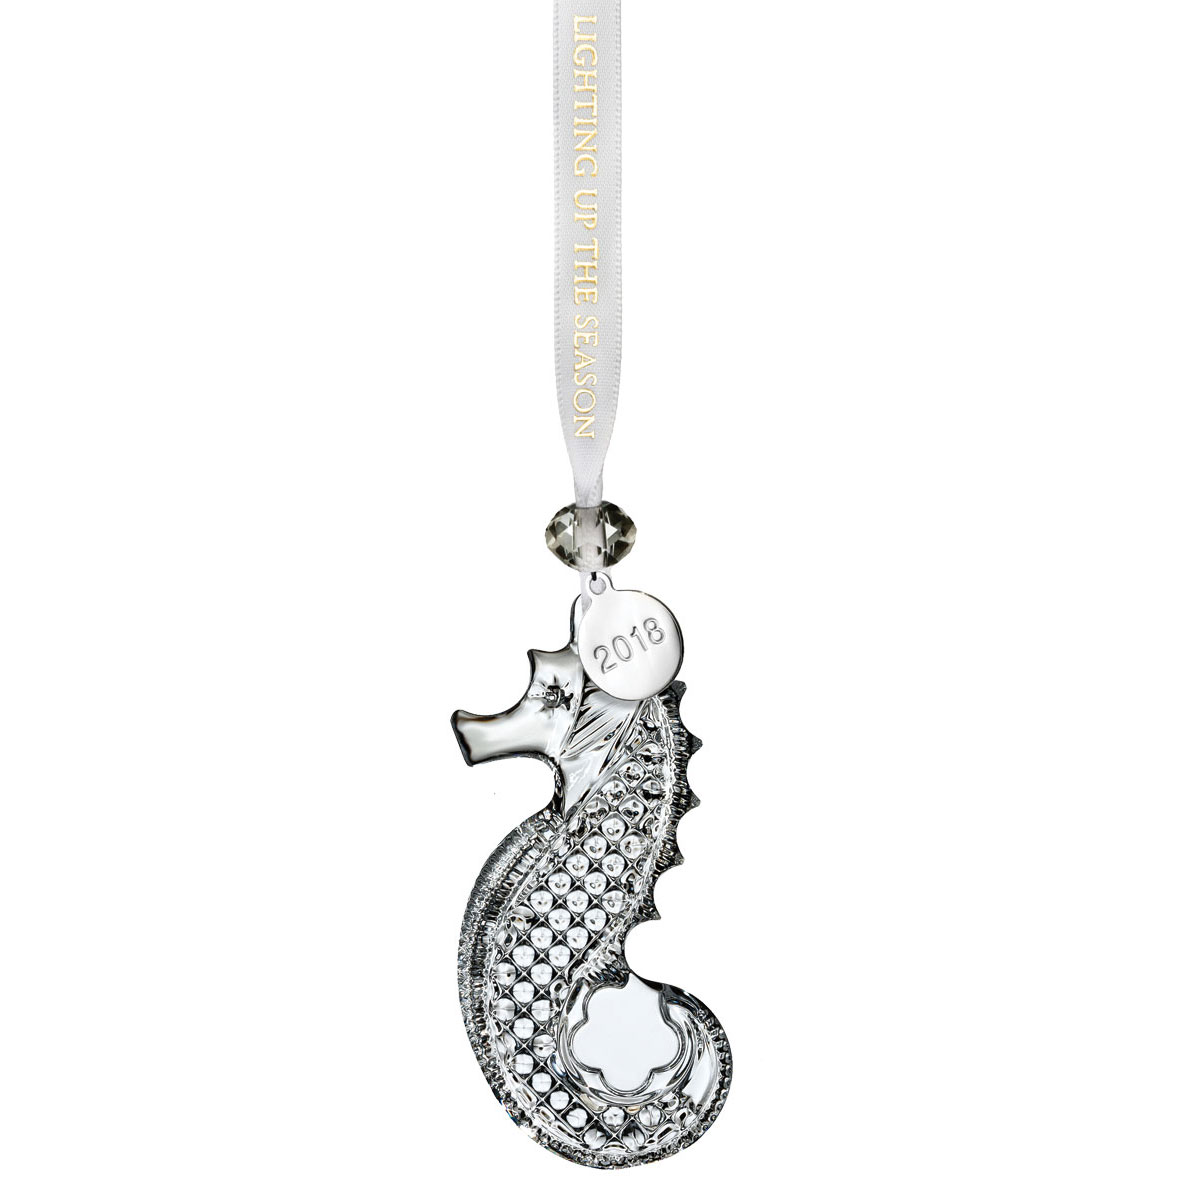 Waterford 2018 Clear Seahorse Ornament